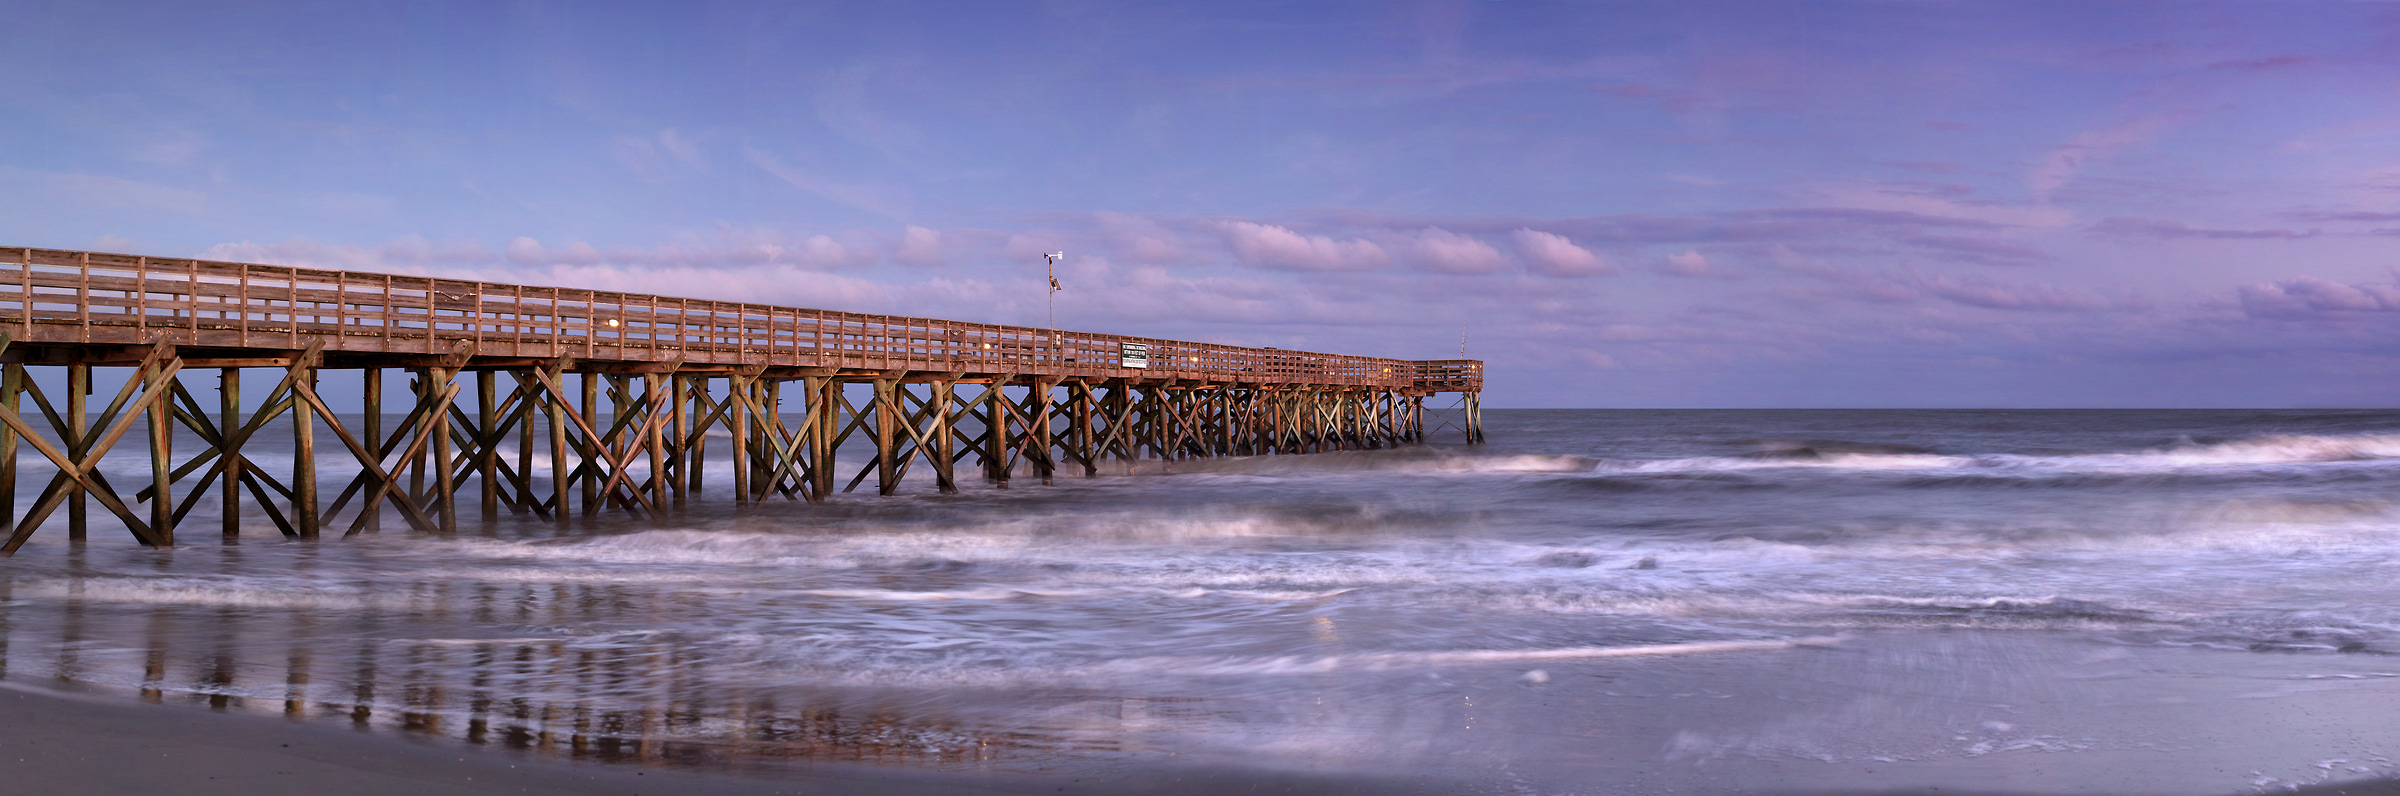 372 megapixels! A very high resolution, large-format VAST photo print of a beach with a pier going out into the ocean at sunset; photograph created by Phil Crawshay in Isle of Palms, South Carolina.